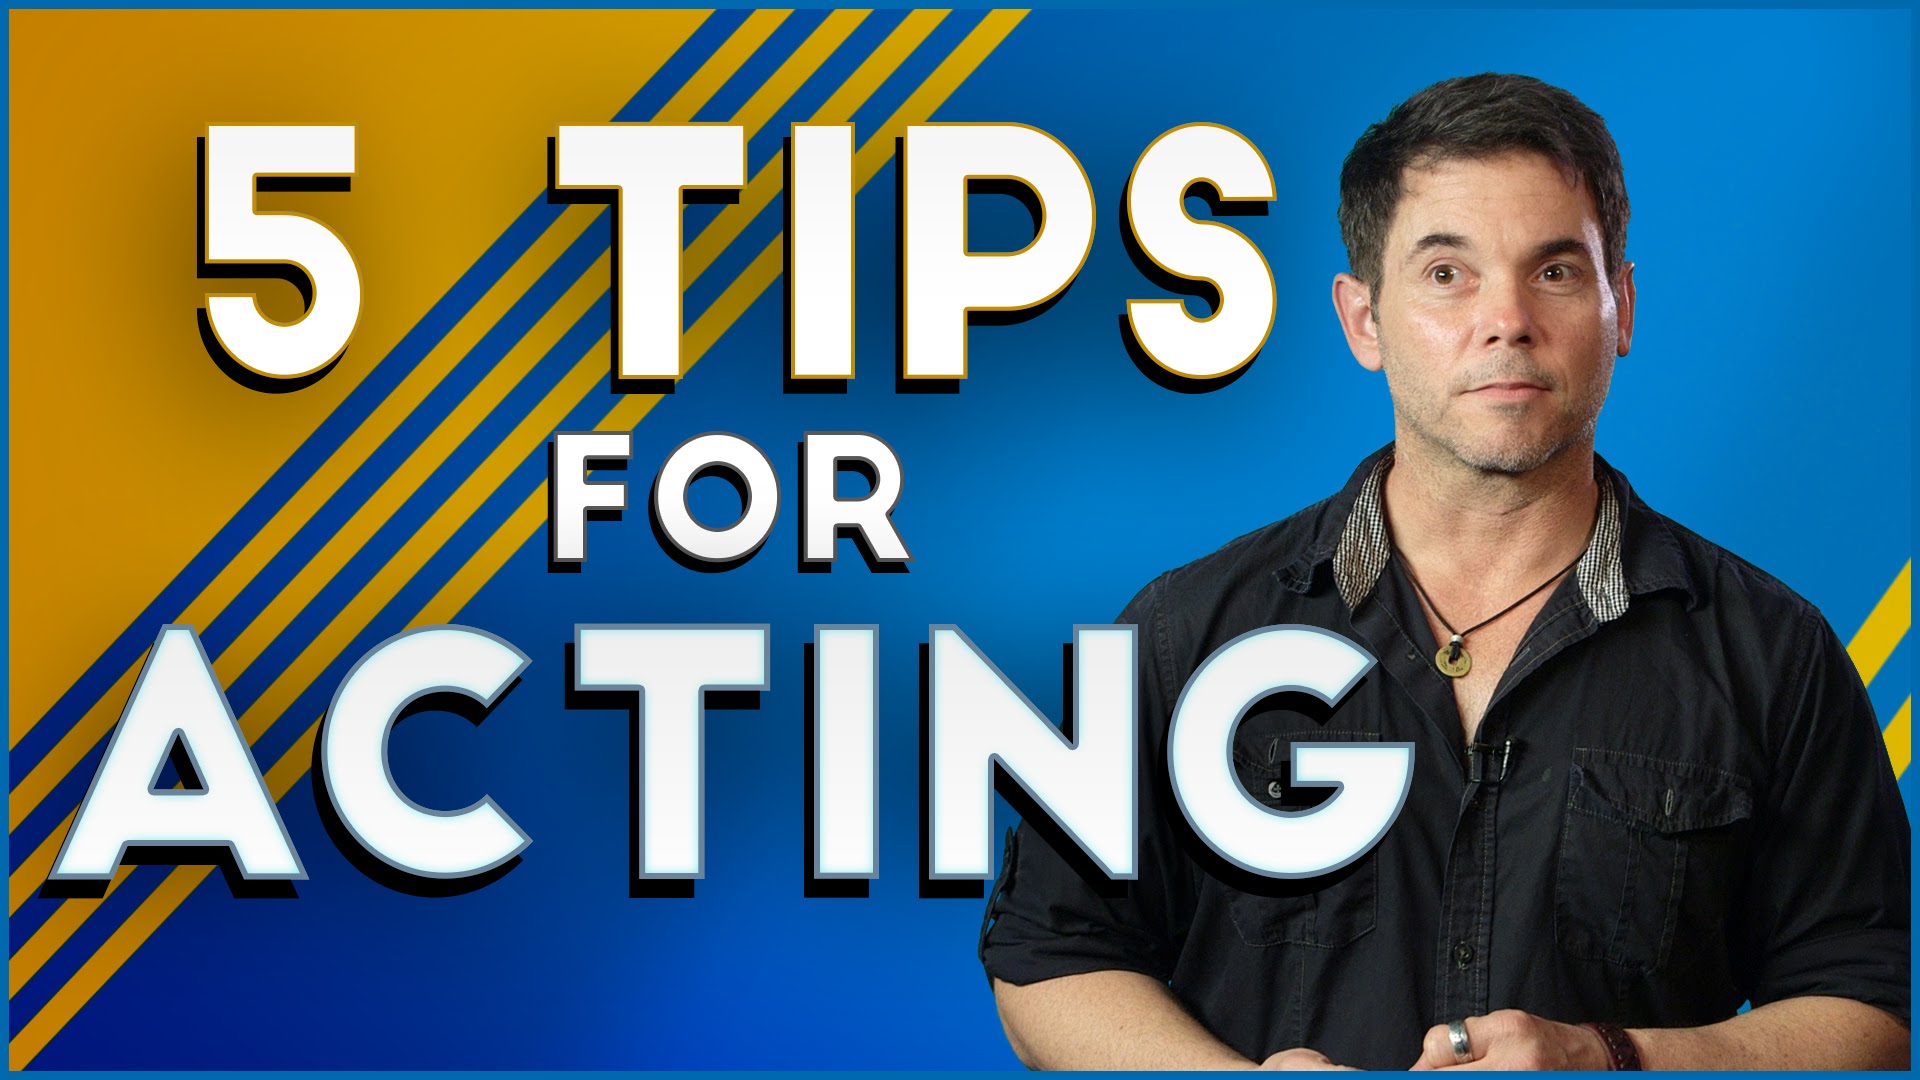 5 Tips For Acting - YouTube